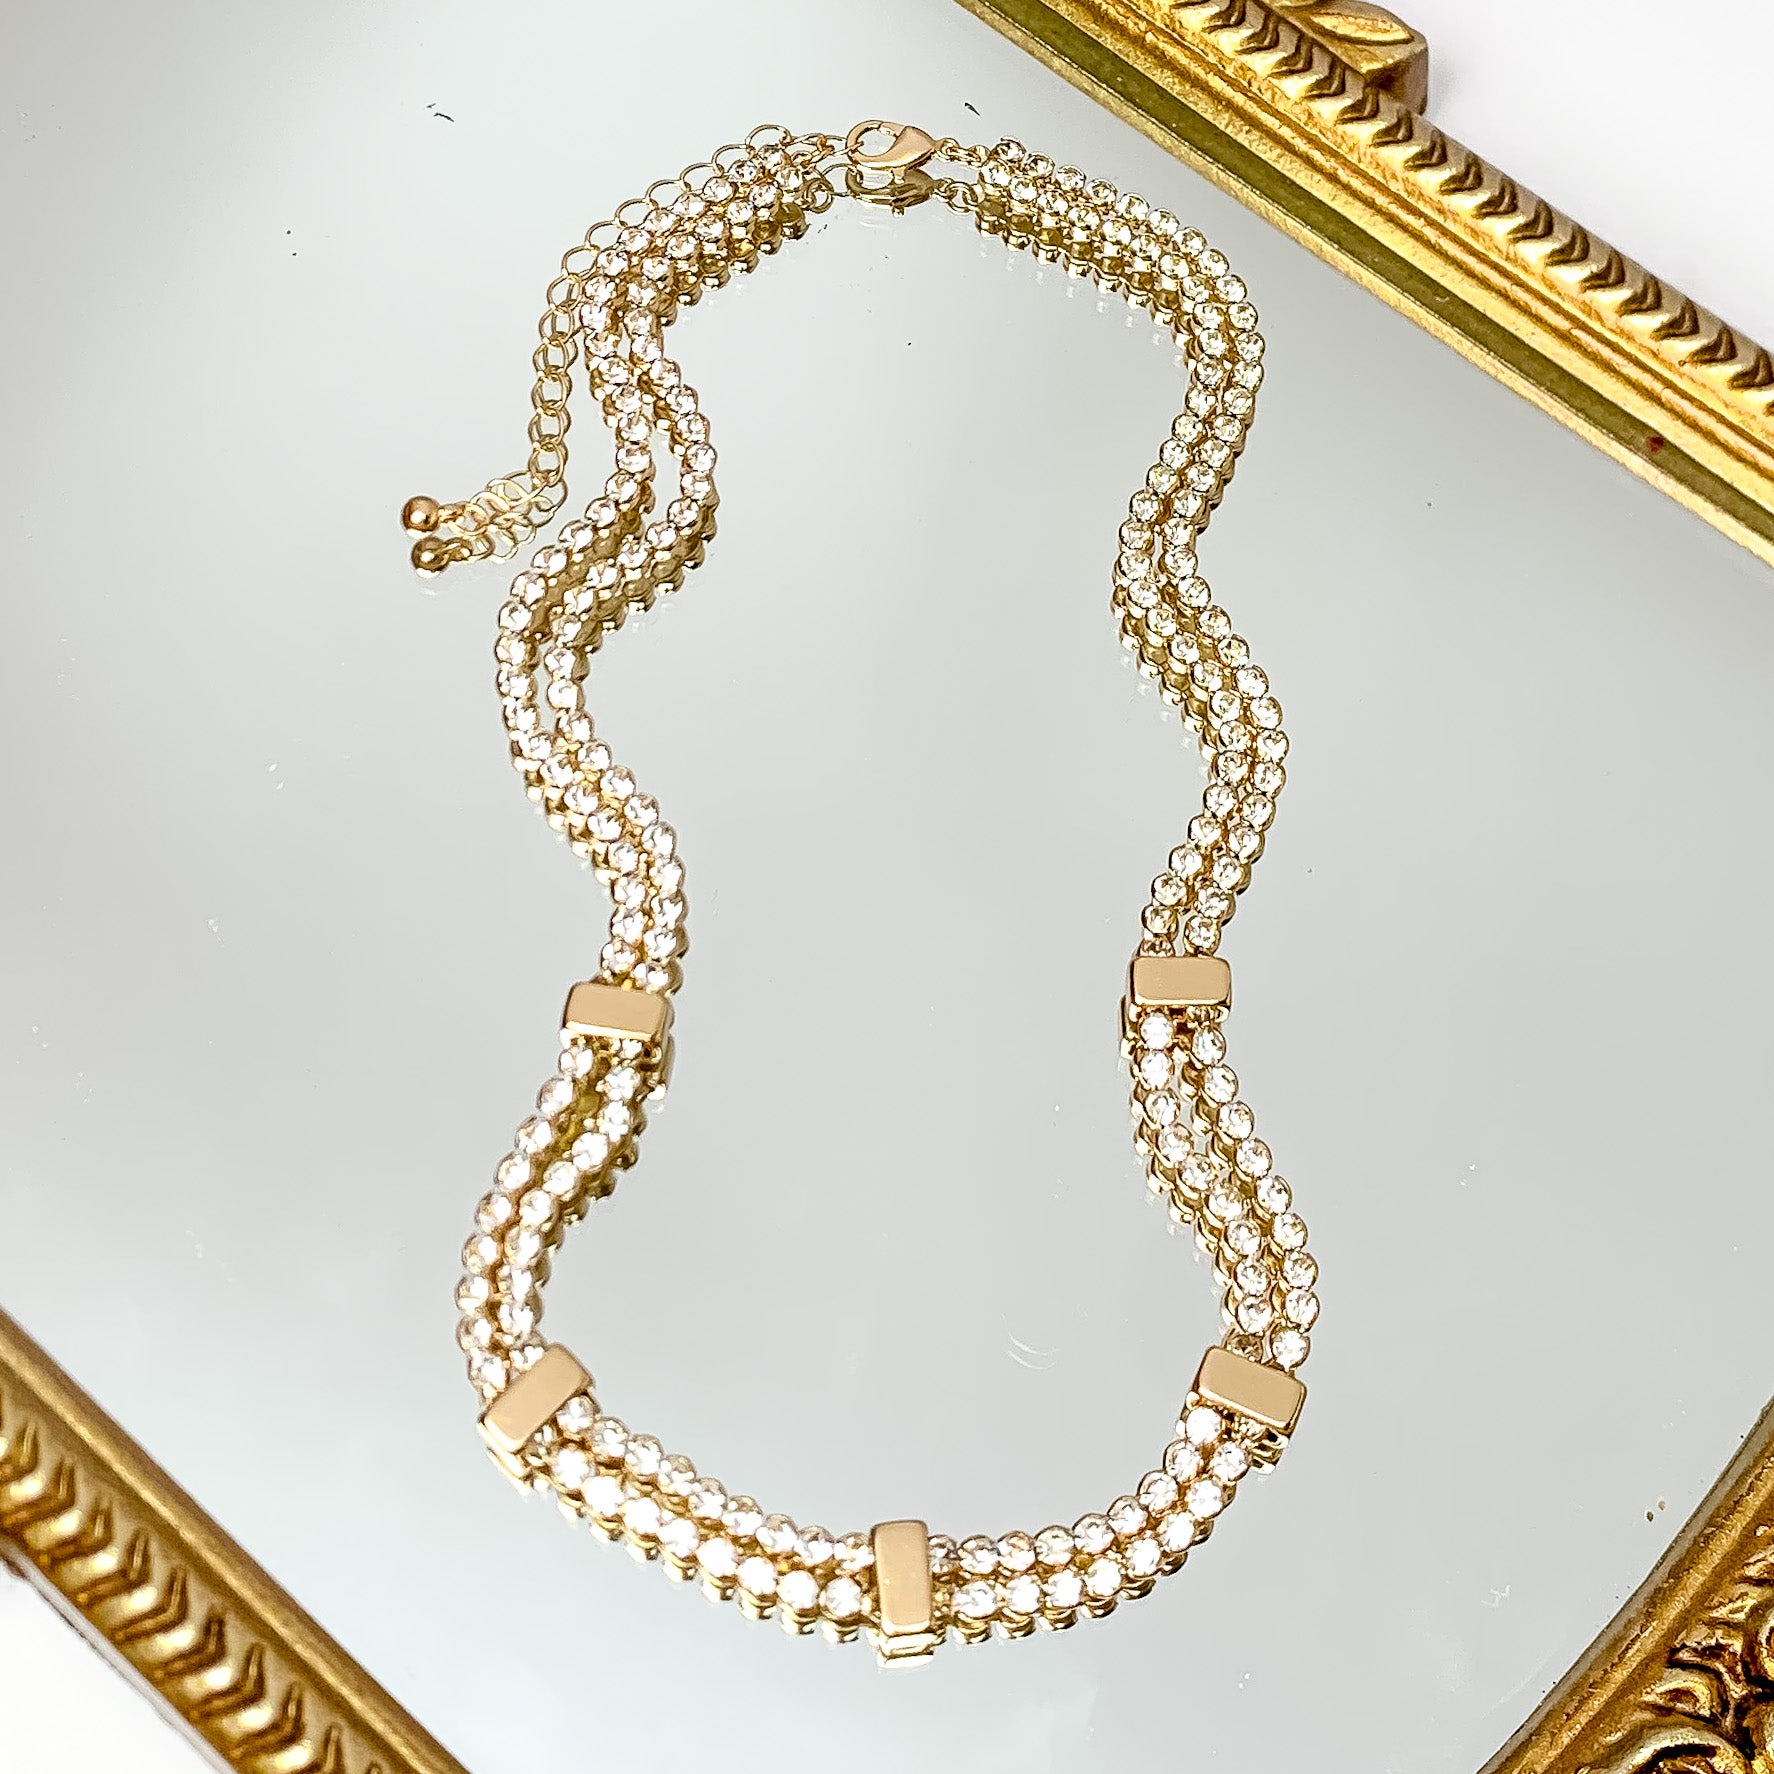 Glam Girl Gold Tone Necklace Outlined in Clear Crystals. Pictured on a white background with disco balls as an accessory on the left side.